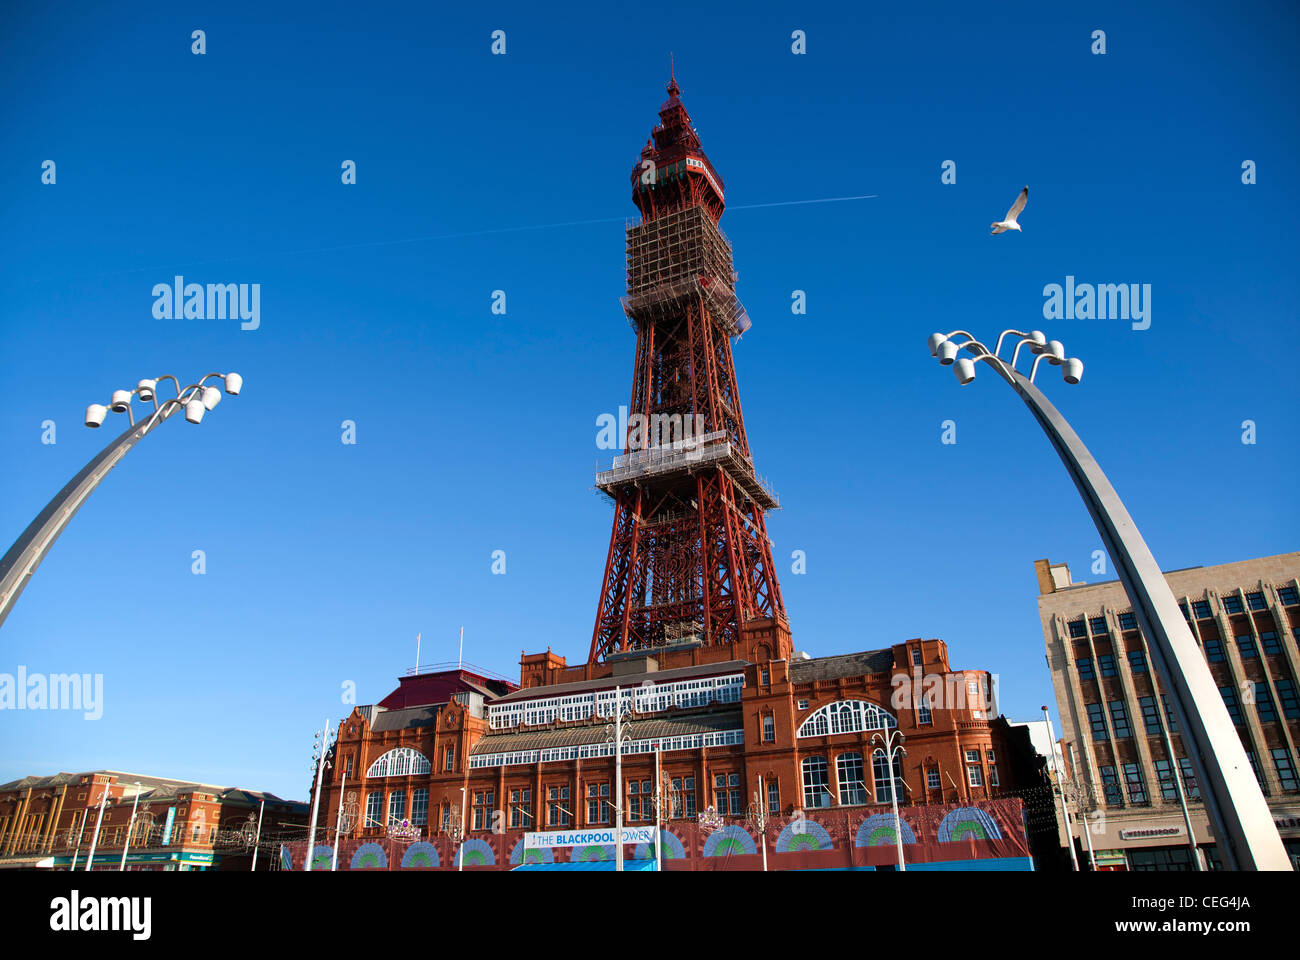 Blackpool tower and new lights on the promenade. Stock Photo